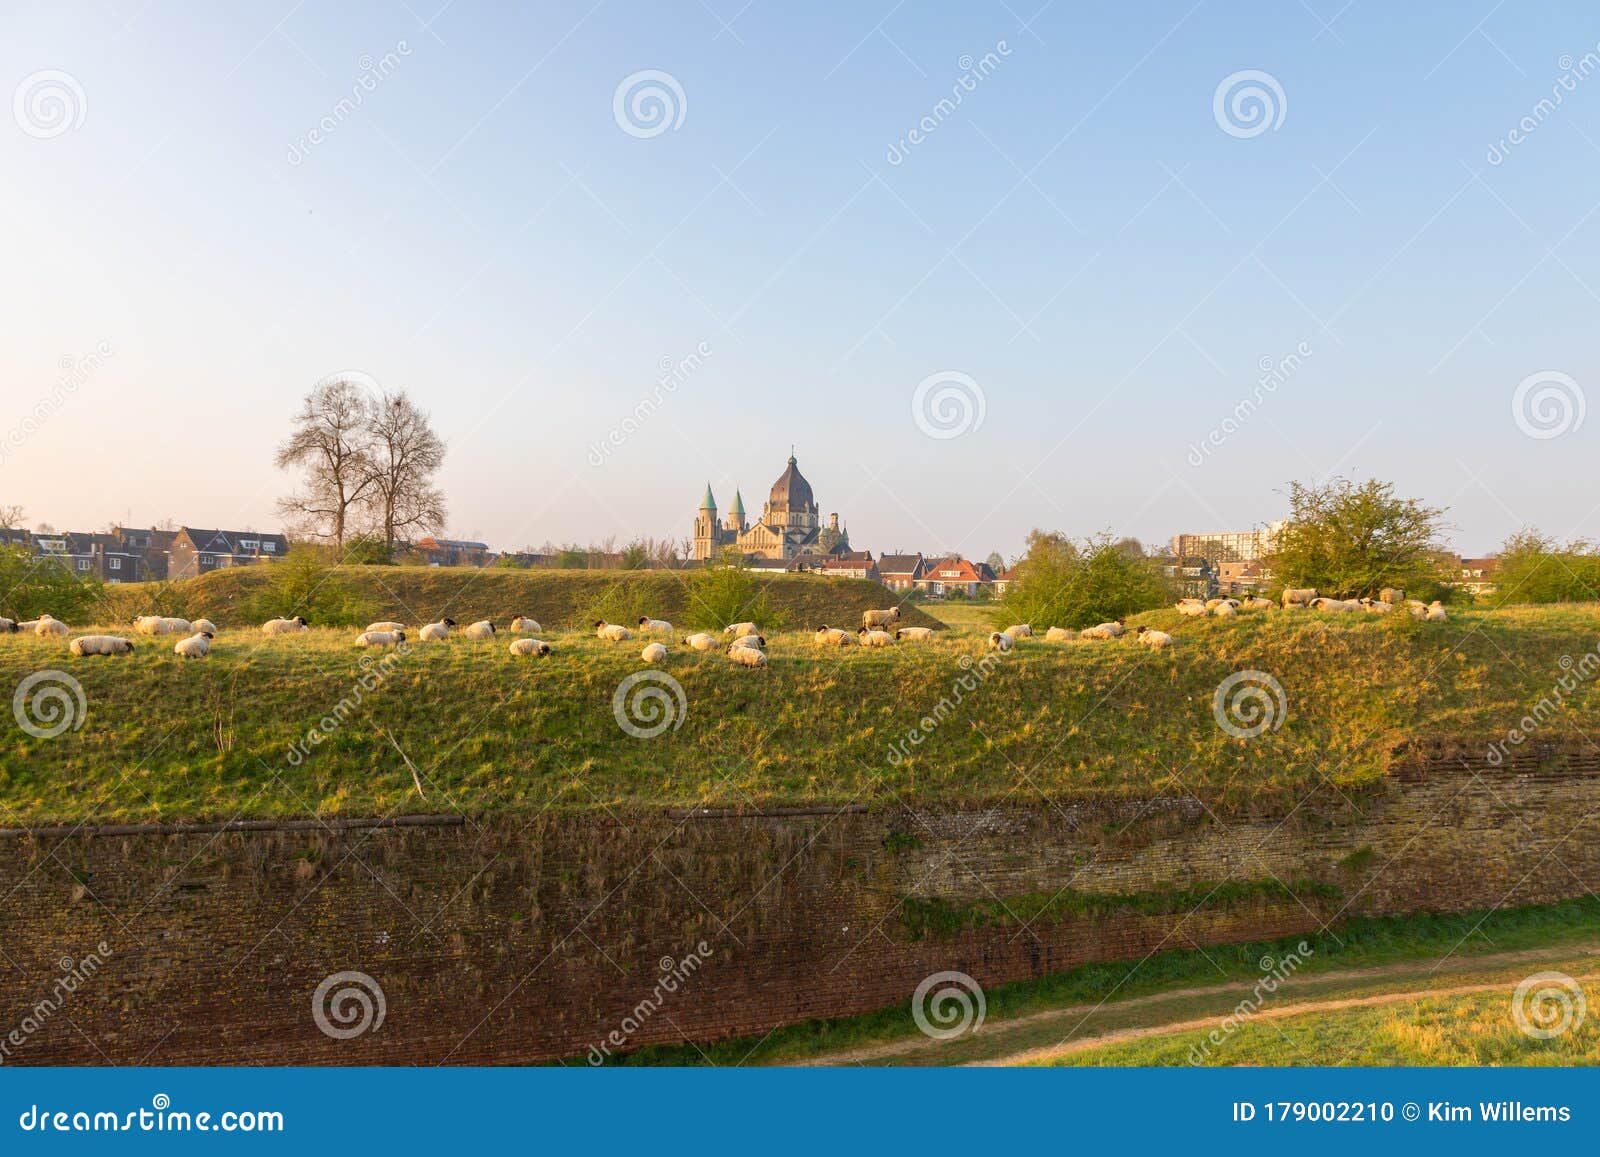 Hoge Fronten In Maastricht With Sheep Being Used For ...